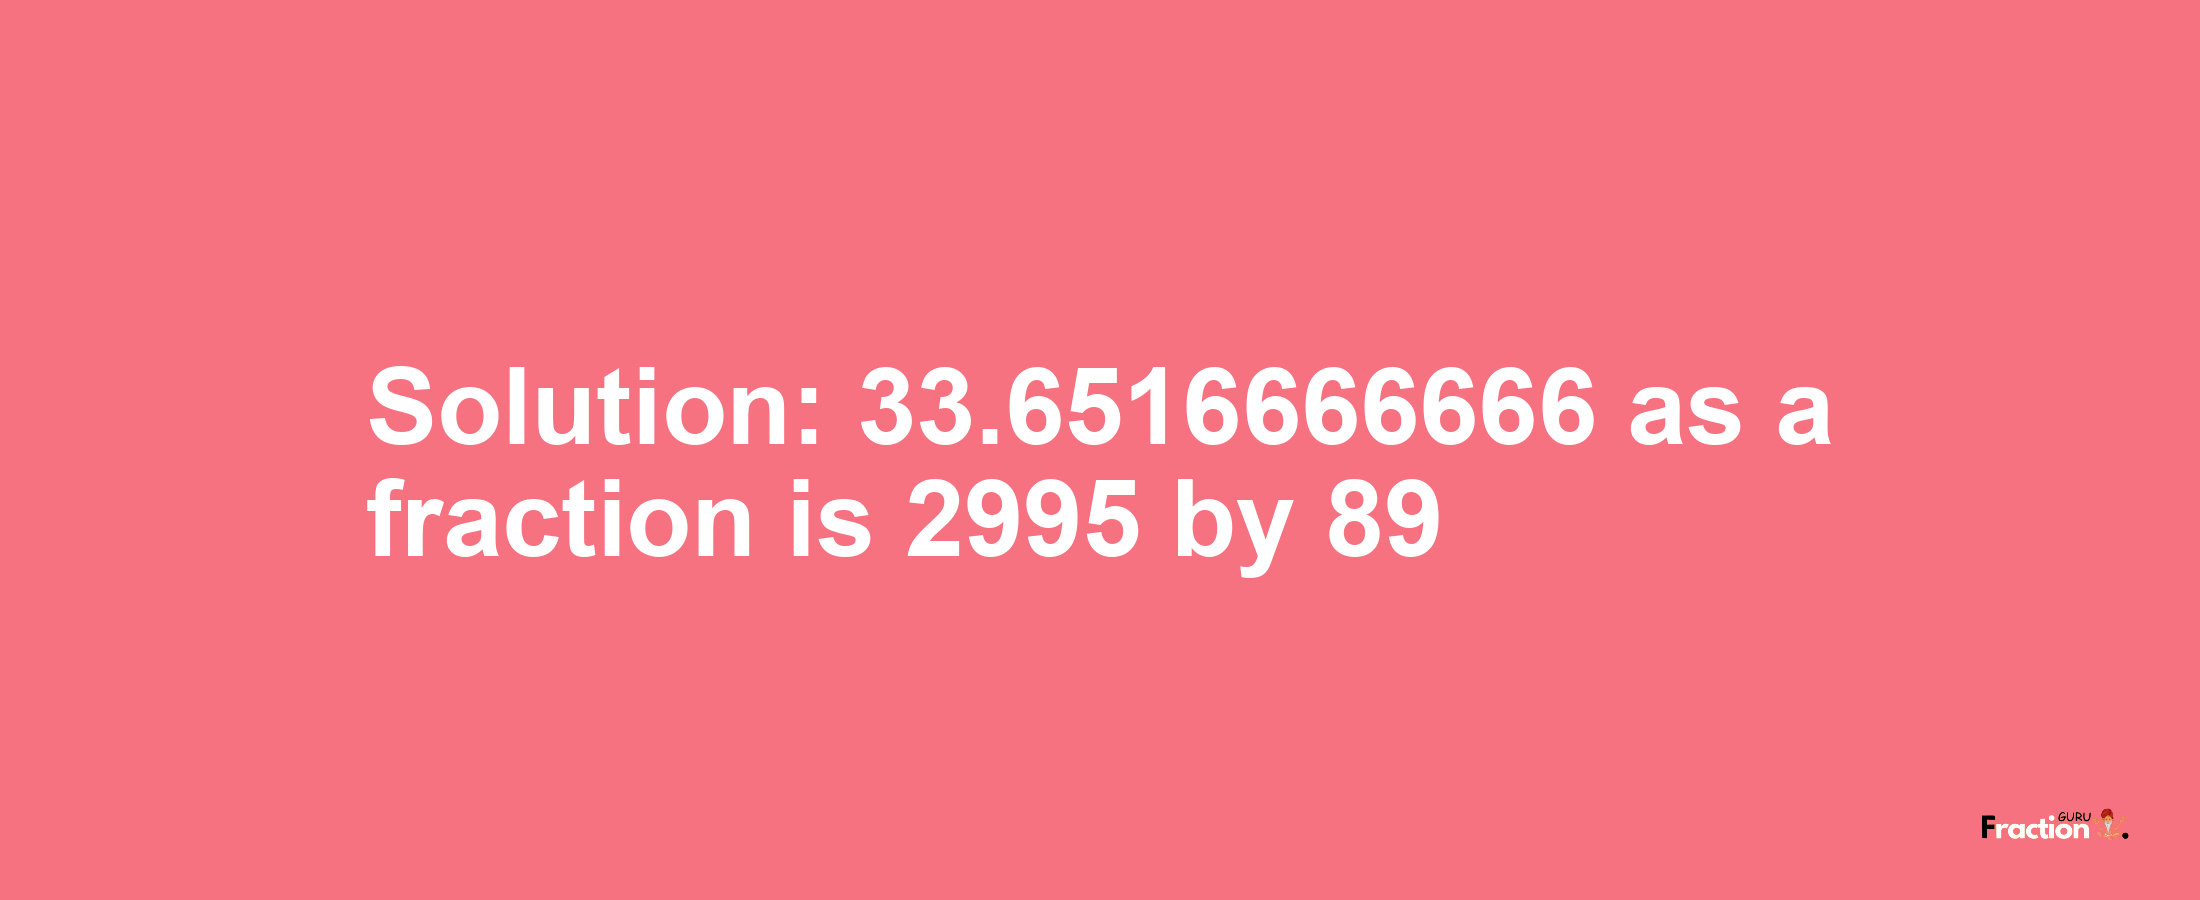 Solution:33.6516666666 as a fraction is 2995/89